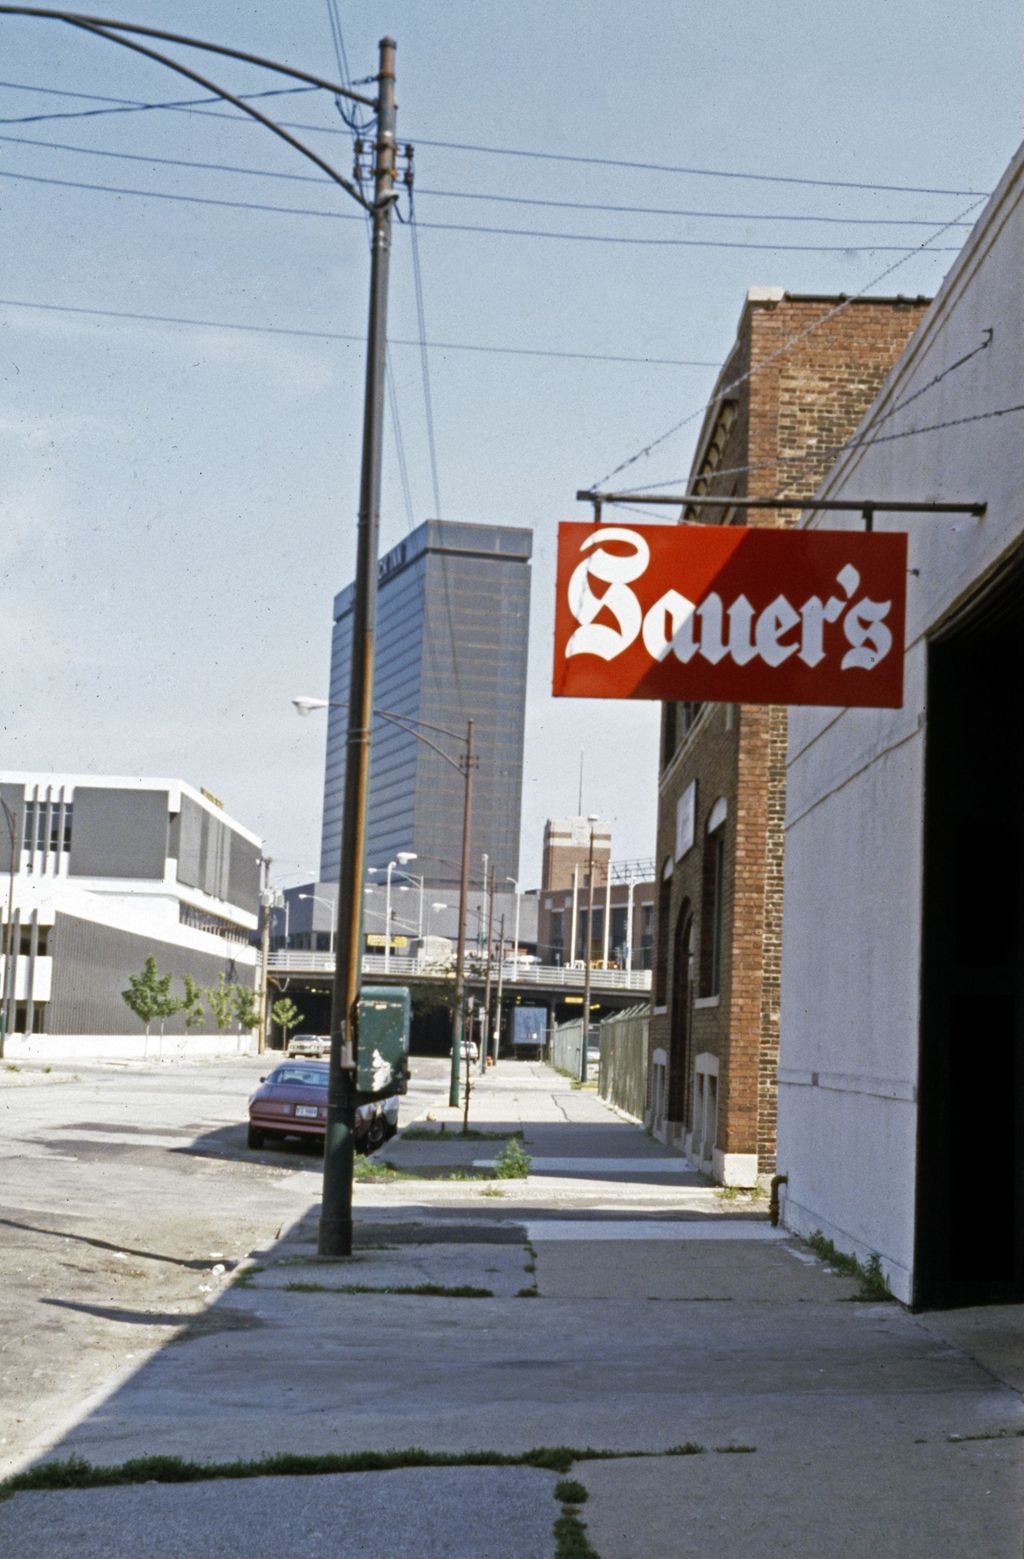 East 23rd Street with Sauer's Restaurant sign